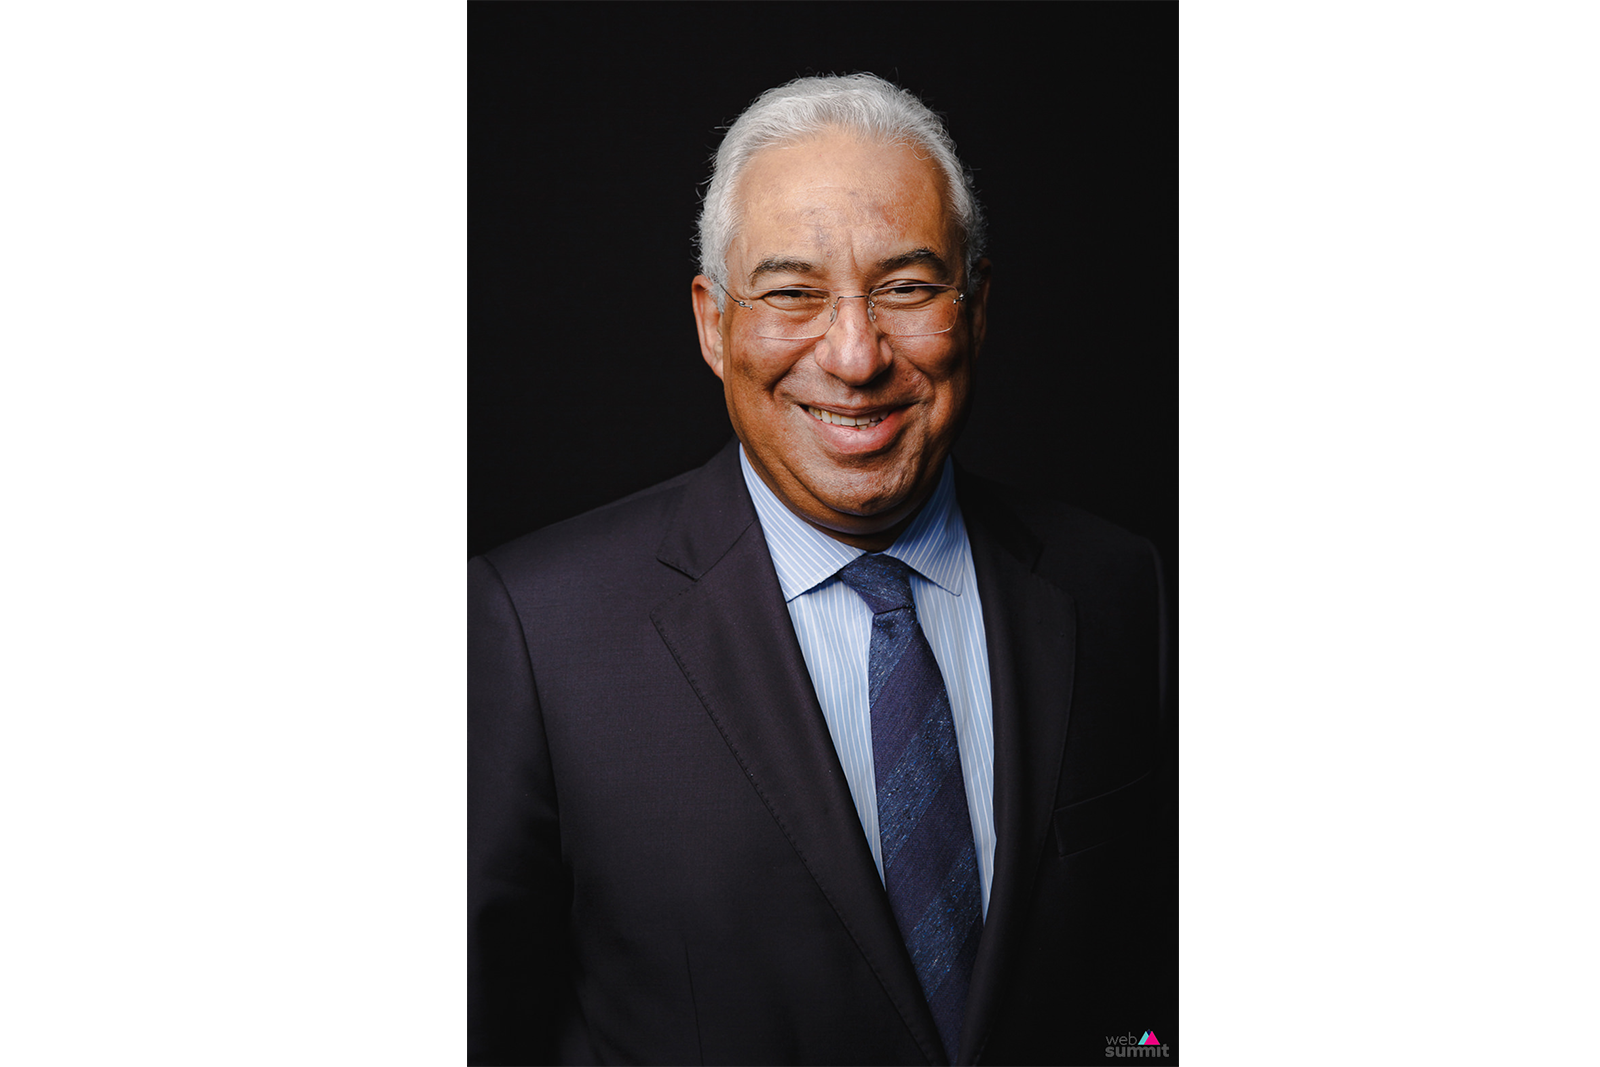 António Costa, Prime-Minister of Portugal (2015-2019)